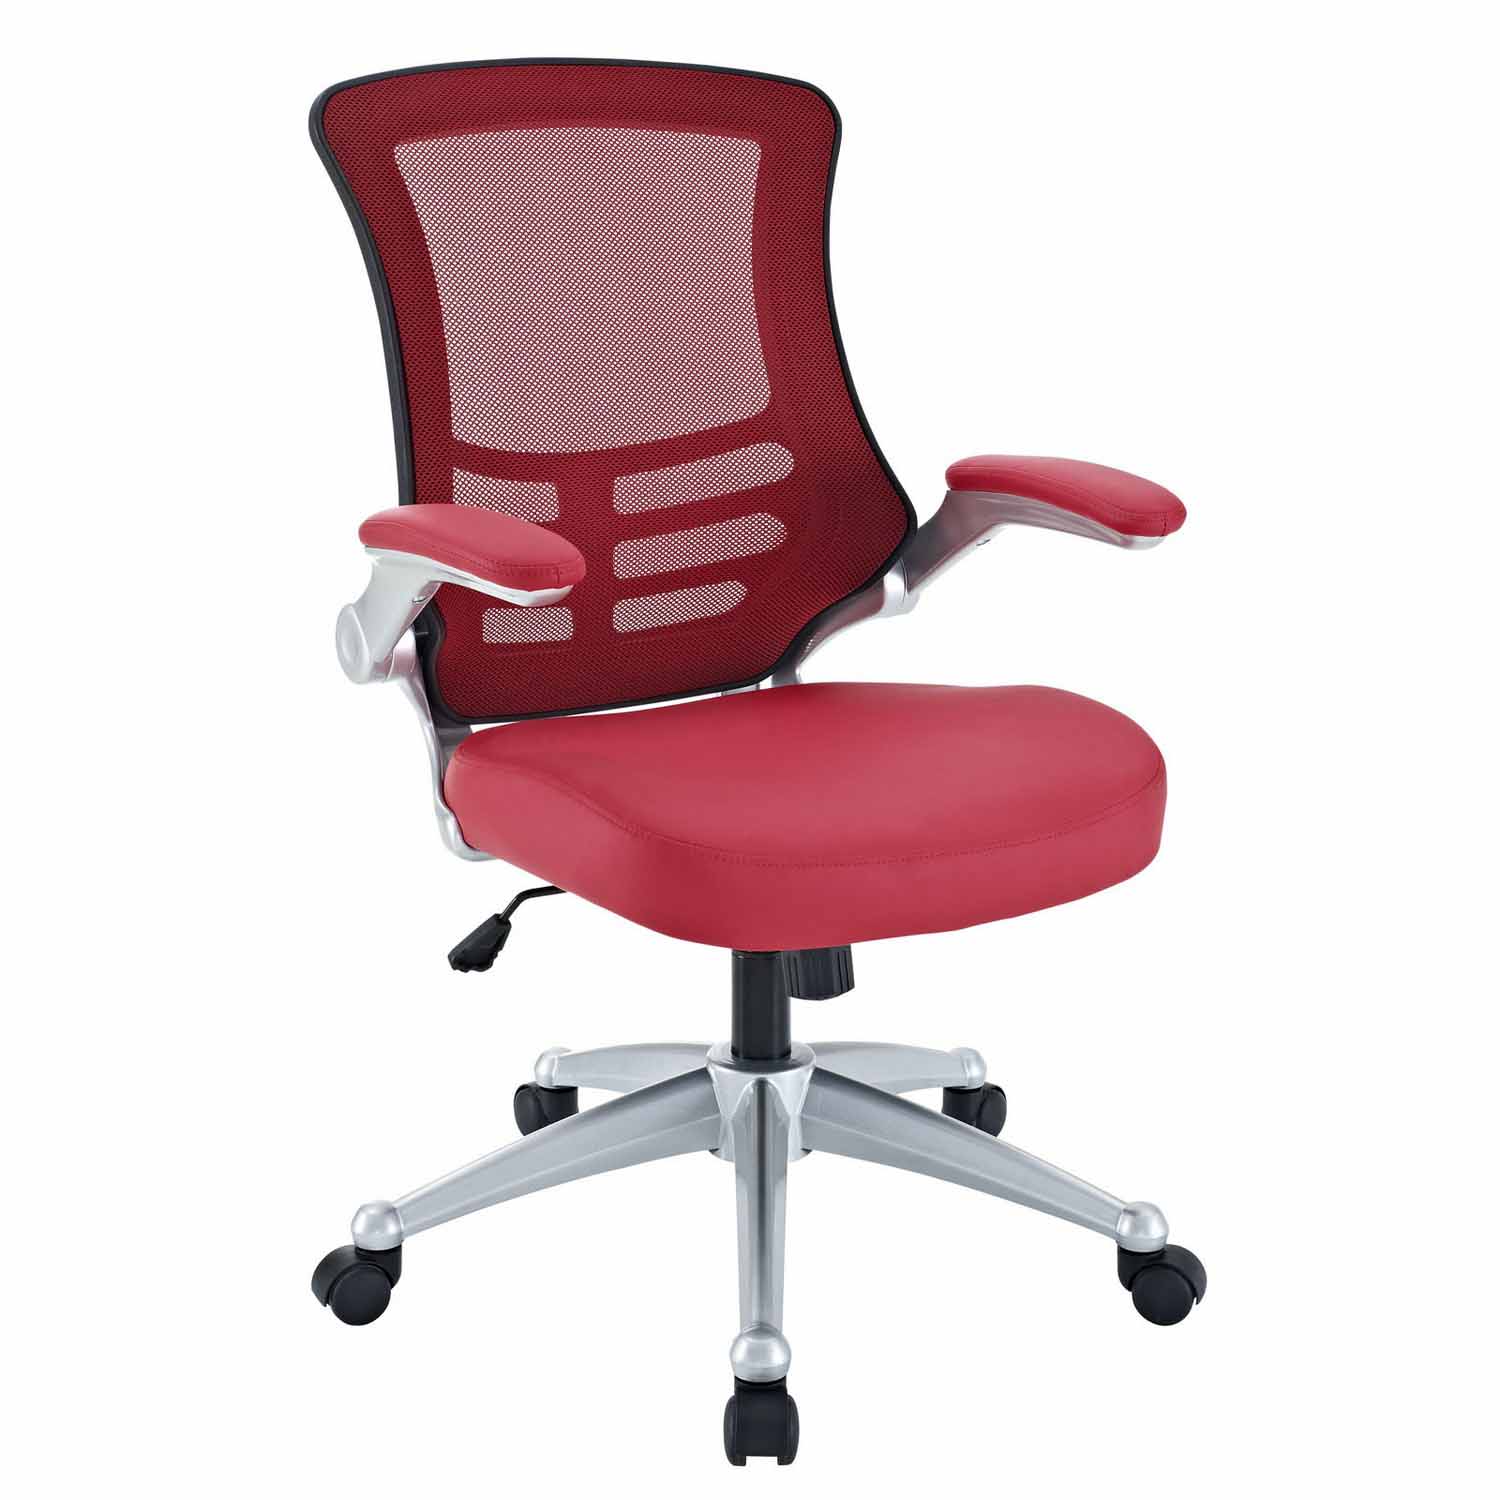 Modway Attainment Office Chair - Red